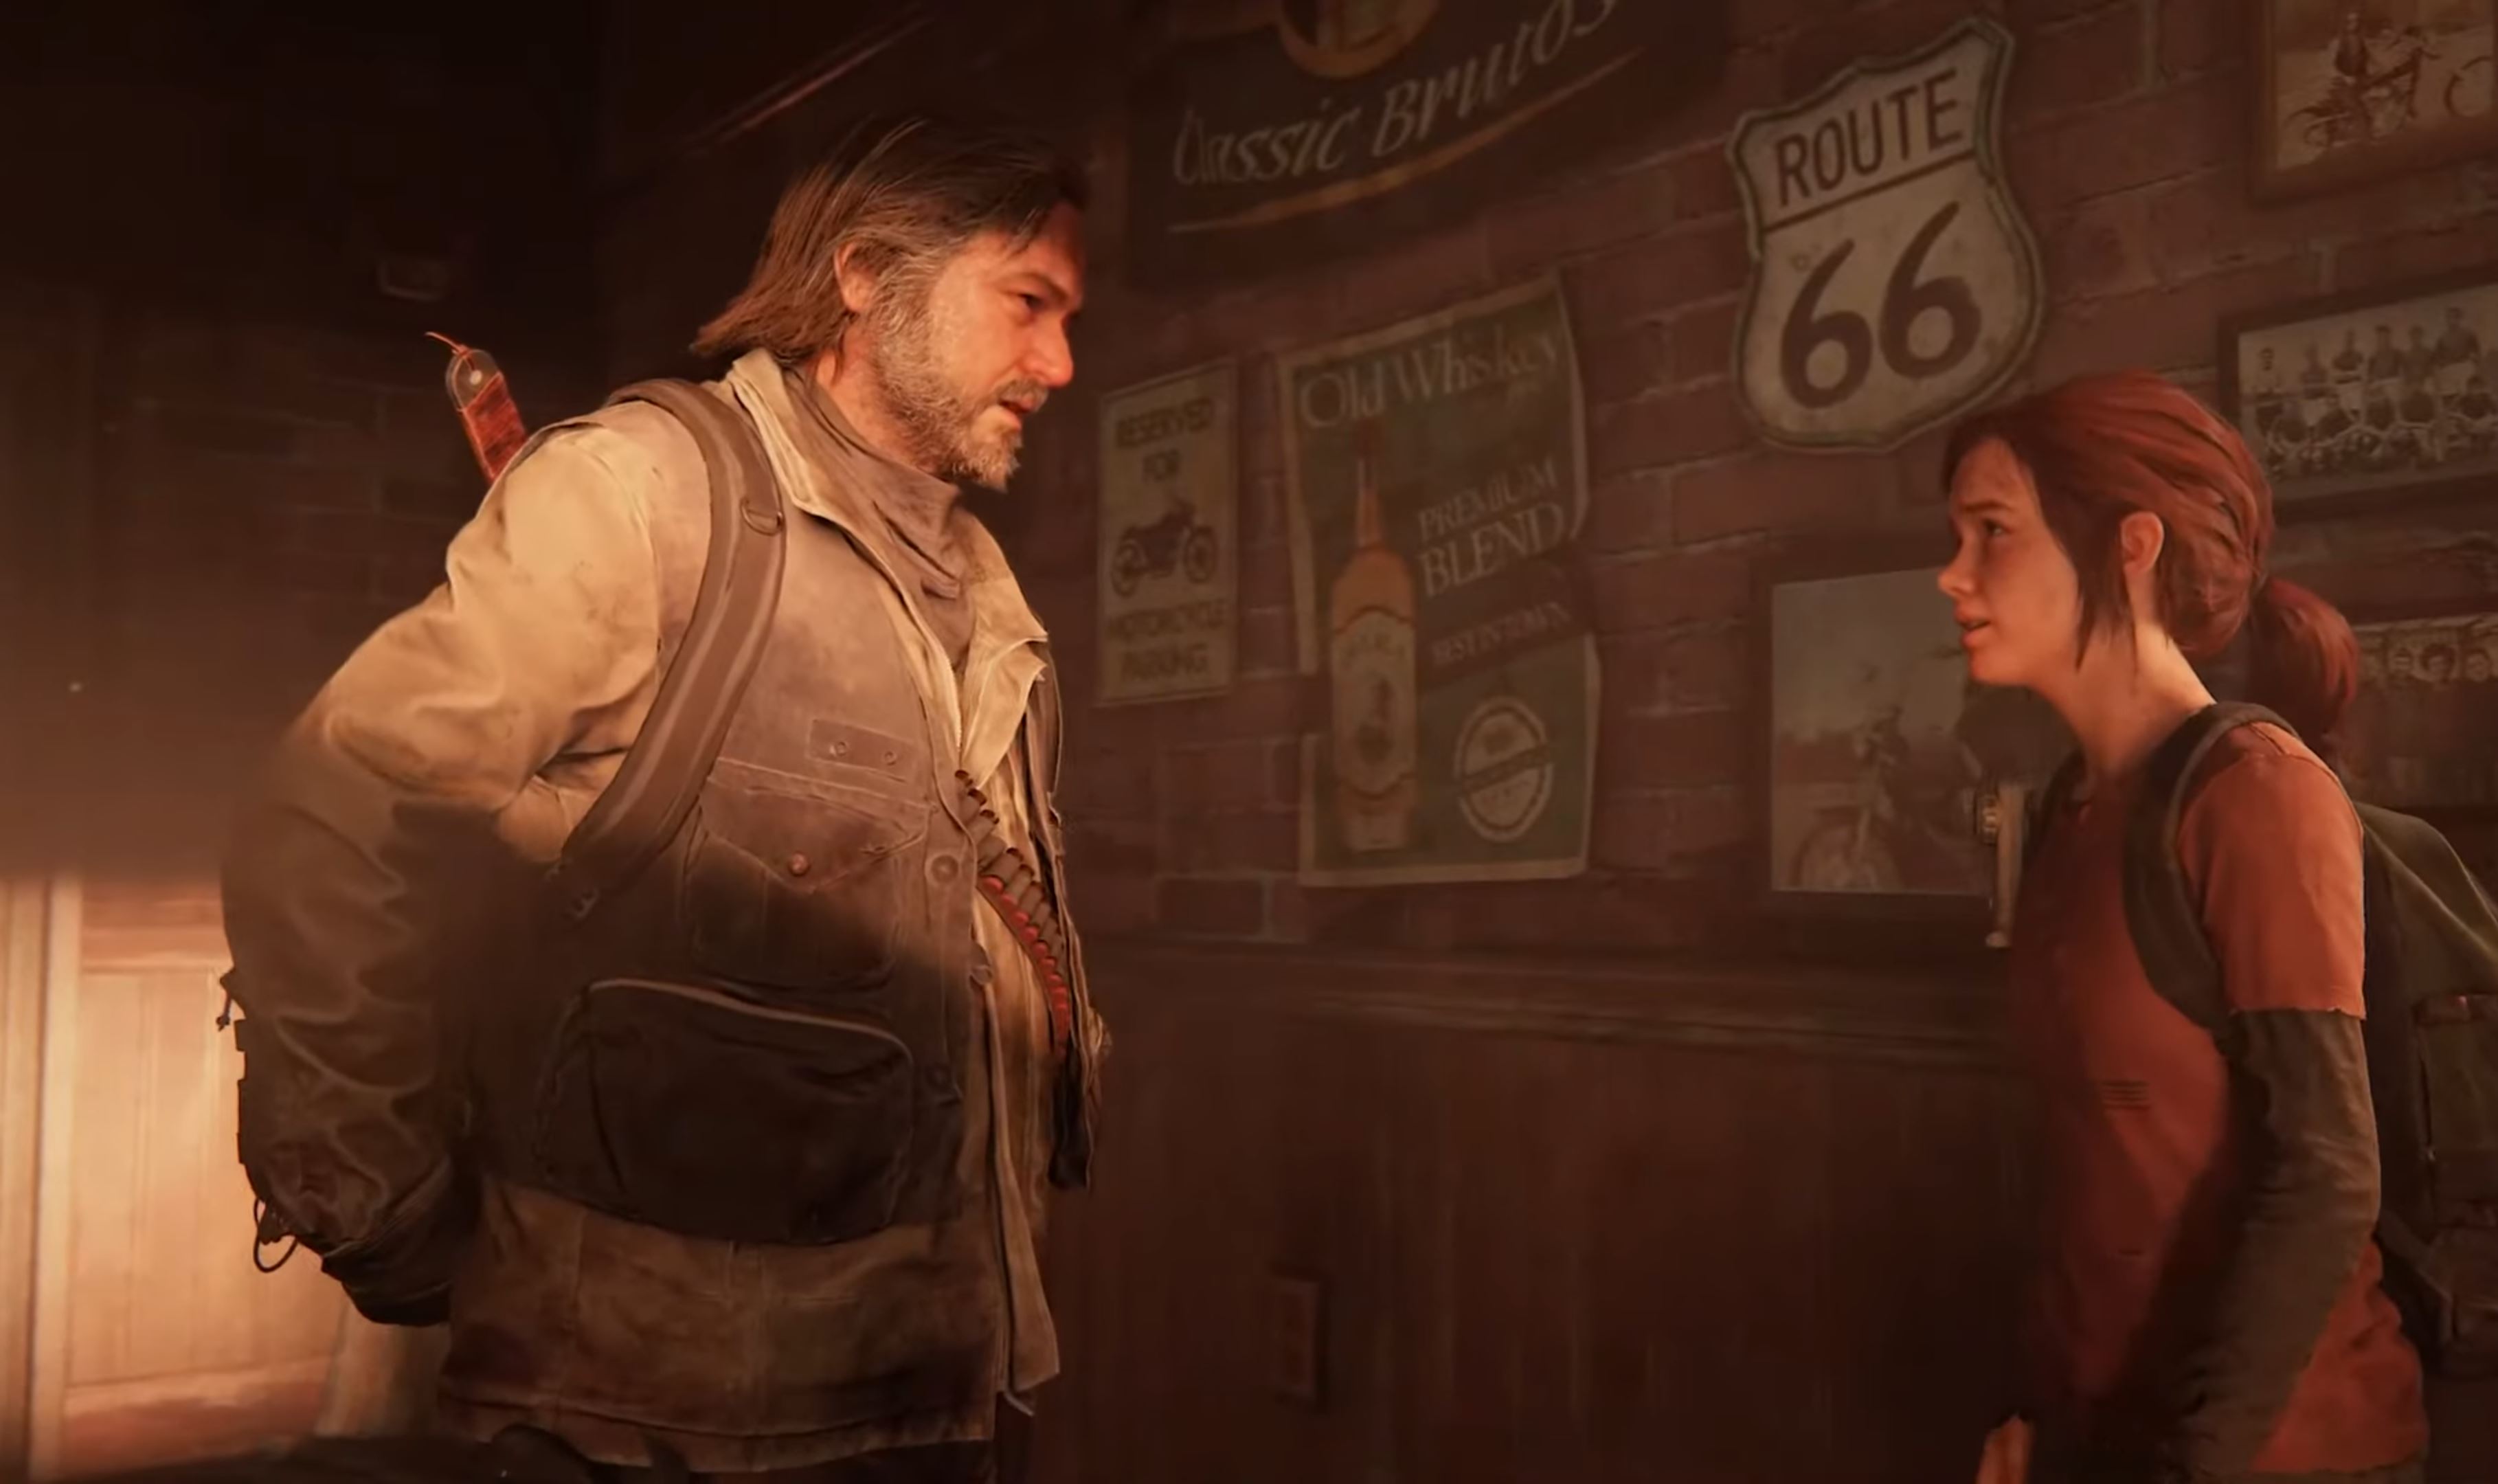 Last Of Us Episode 4 Includes An Iconic Game Actor (Not How You Think)